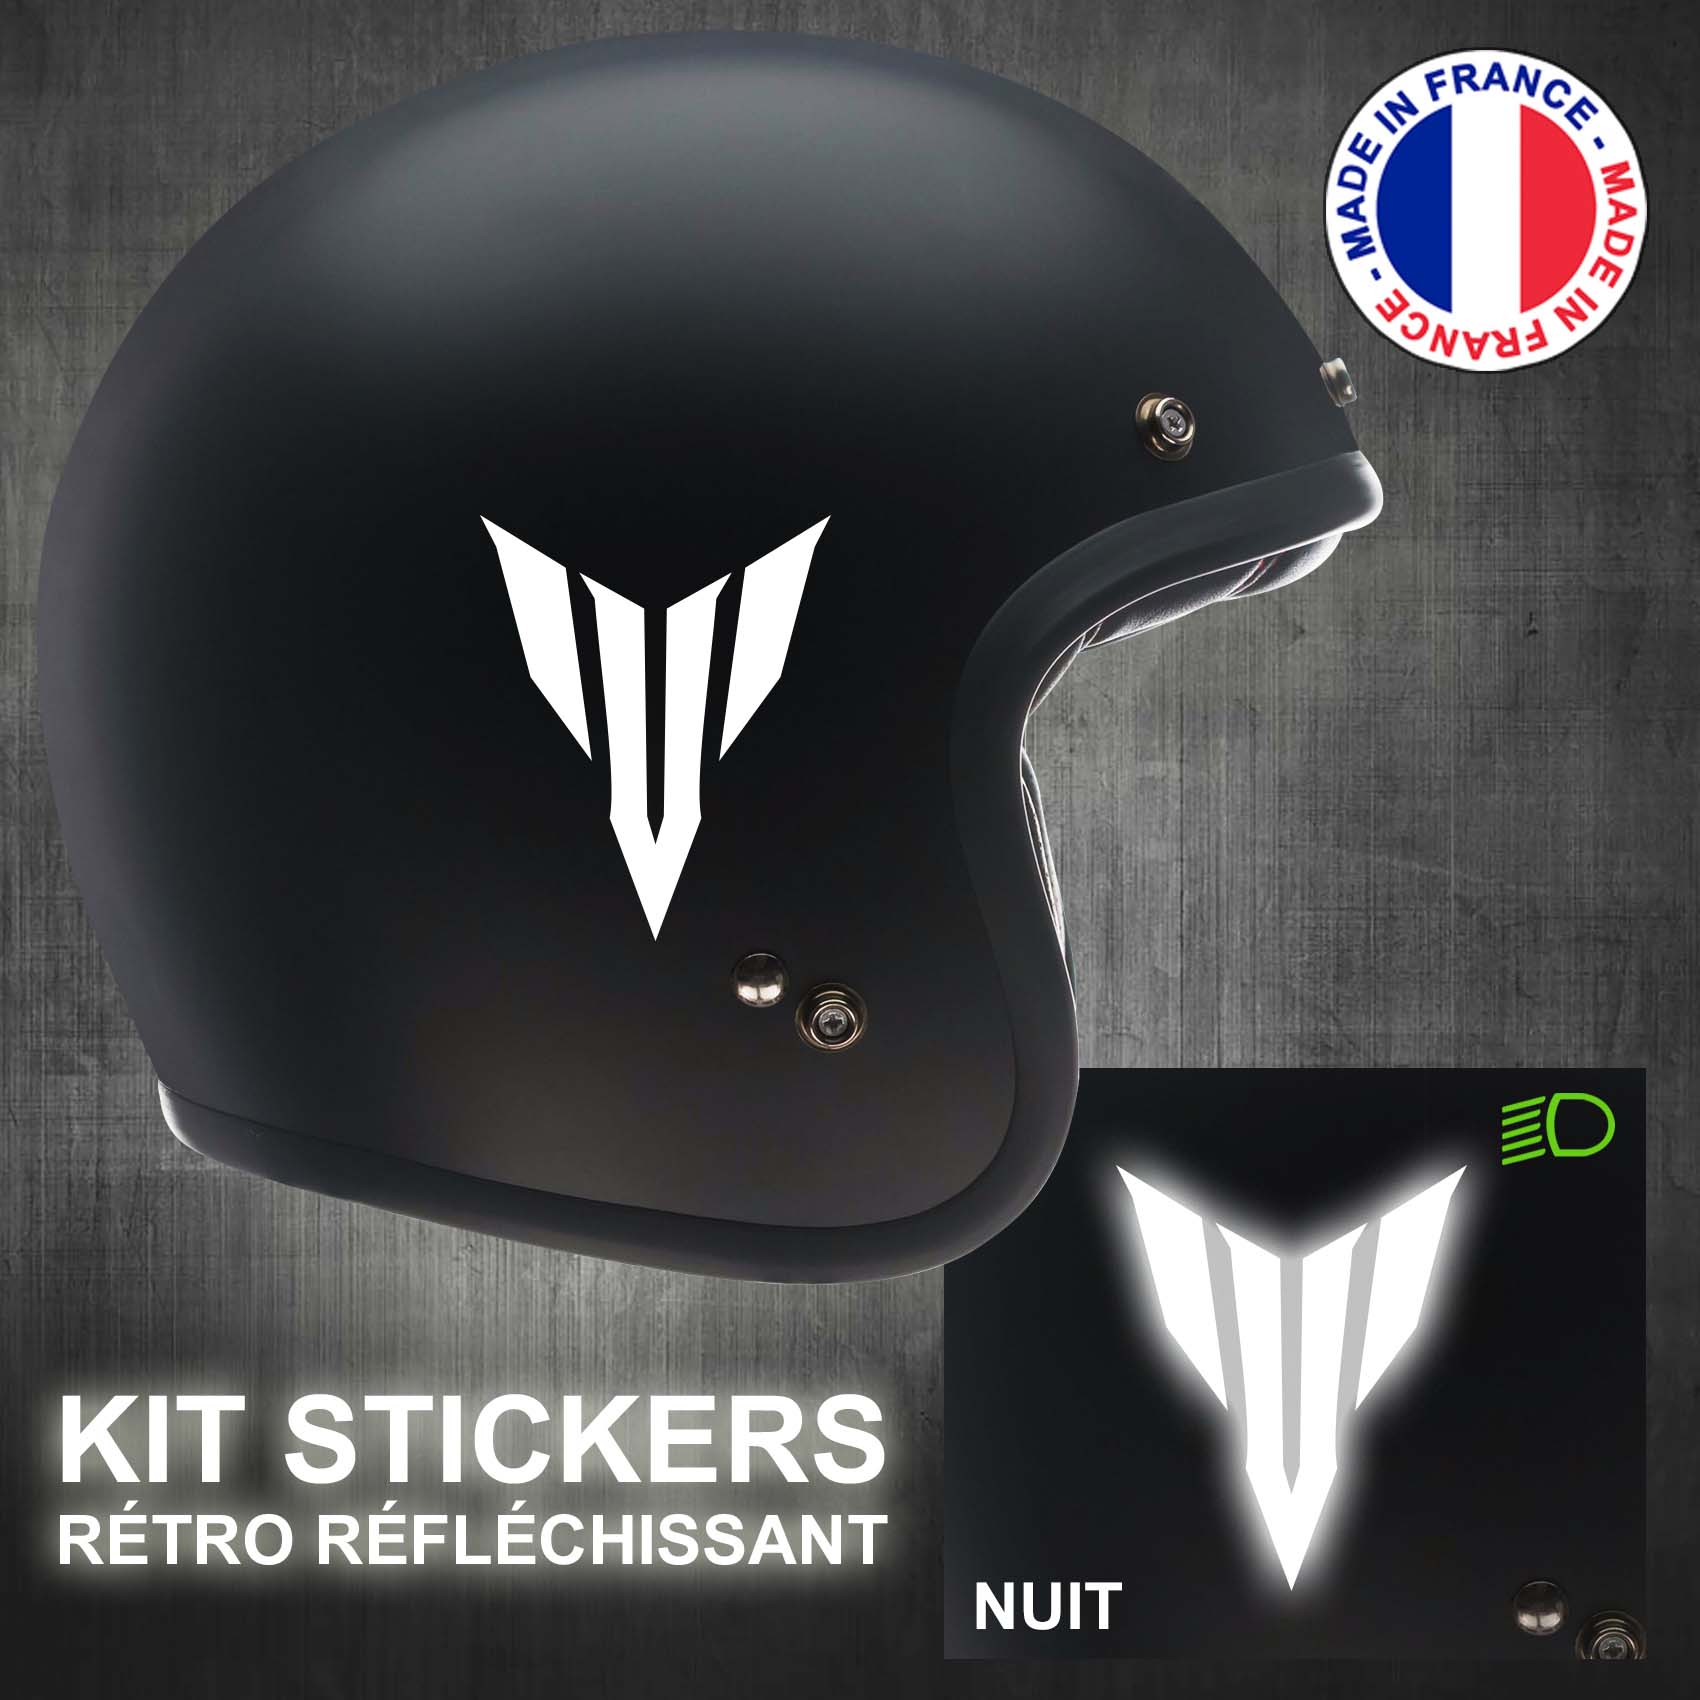 stickers-casque-moto-yamaha-ref5-retro-reflechissant-autocollant-noir-moto-velo-tuning-racing-route-sticker-casques-adhesif-scooter-nuit-securite-decals-personnalise-personnalisable-min